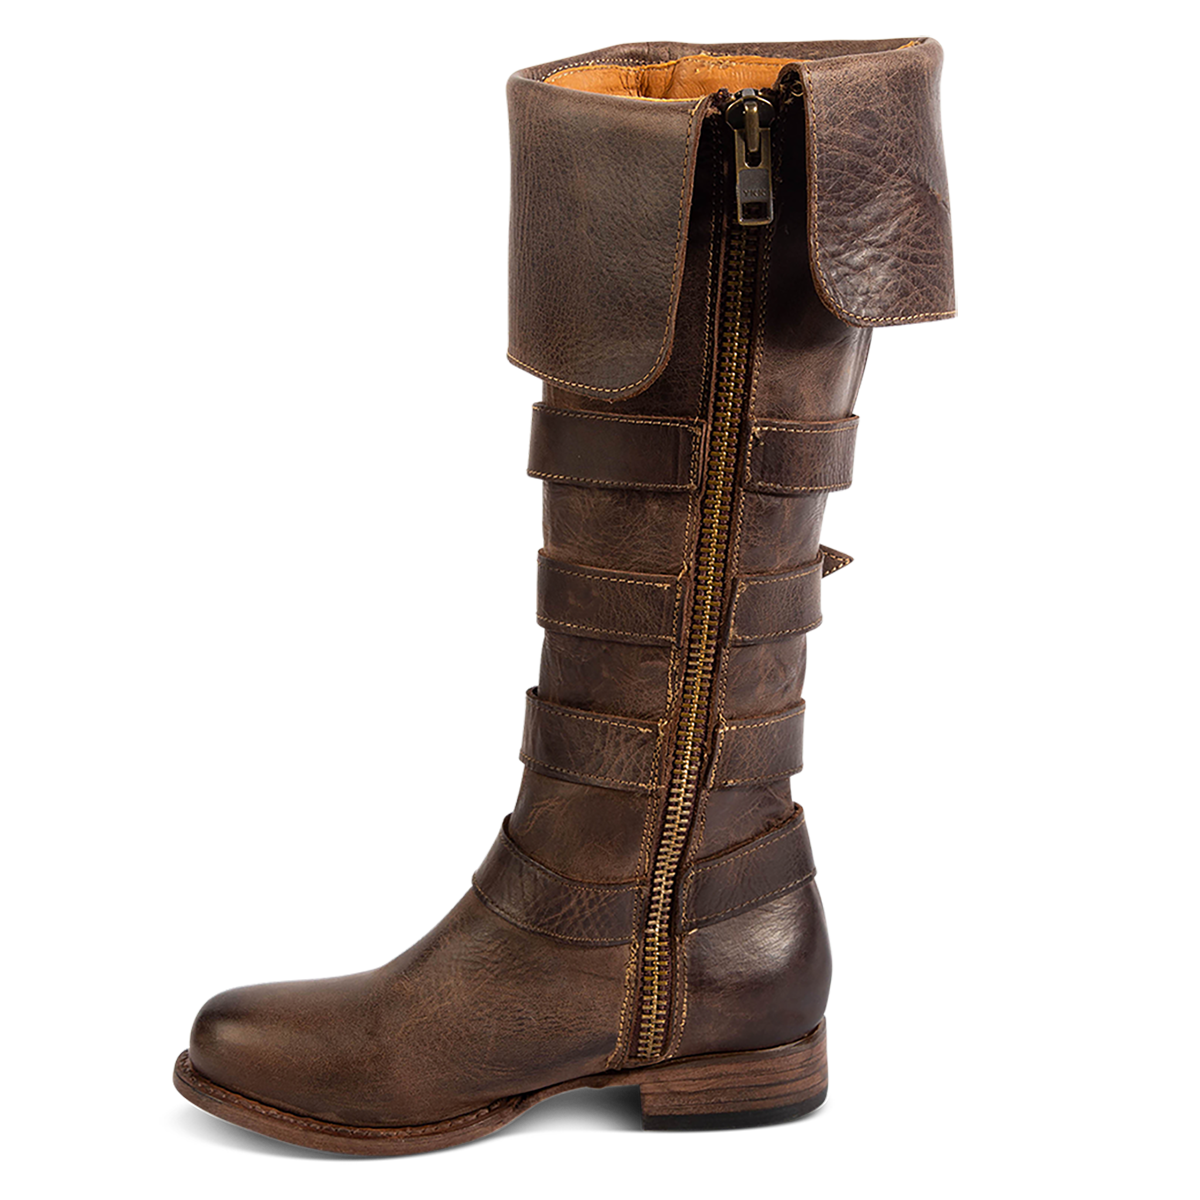 Inside view showing zipper closure and buckle loops with silver hardware on FREEBIRD women's Risky brown fold-over leather boot